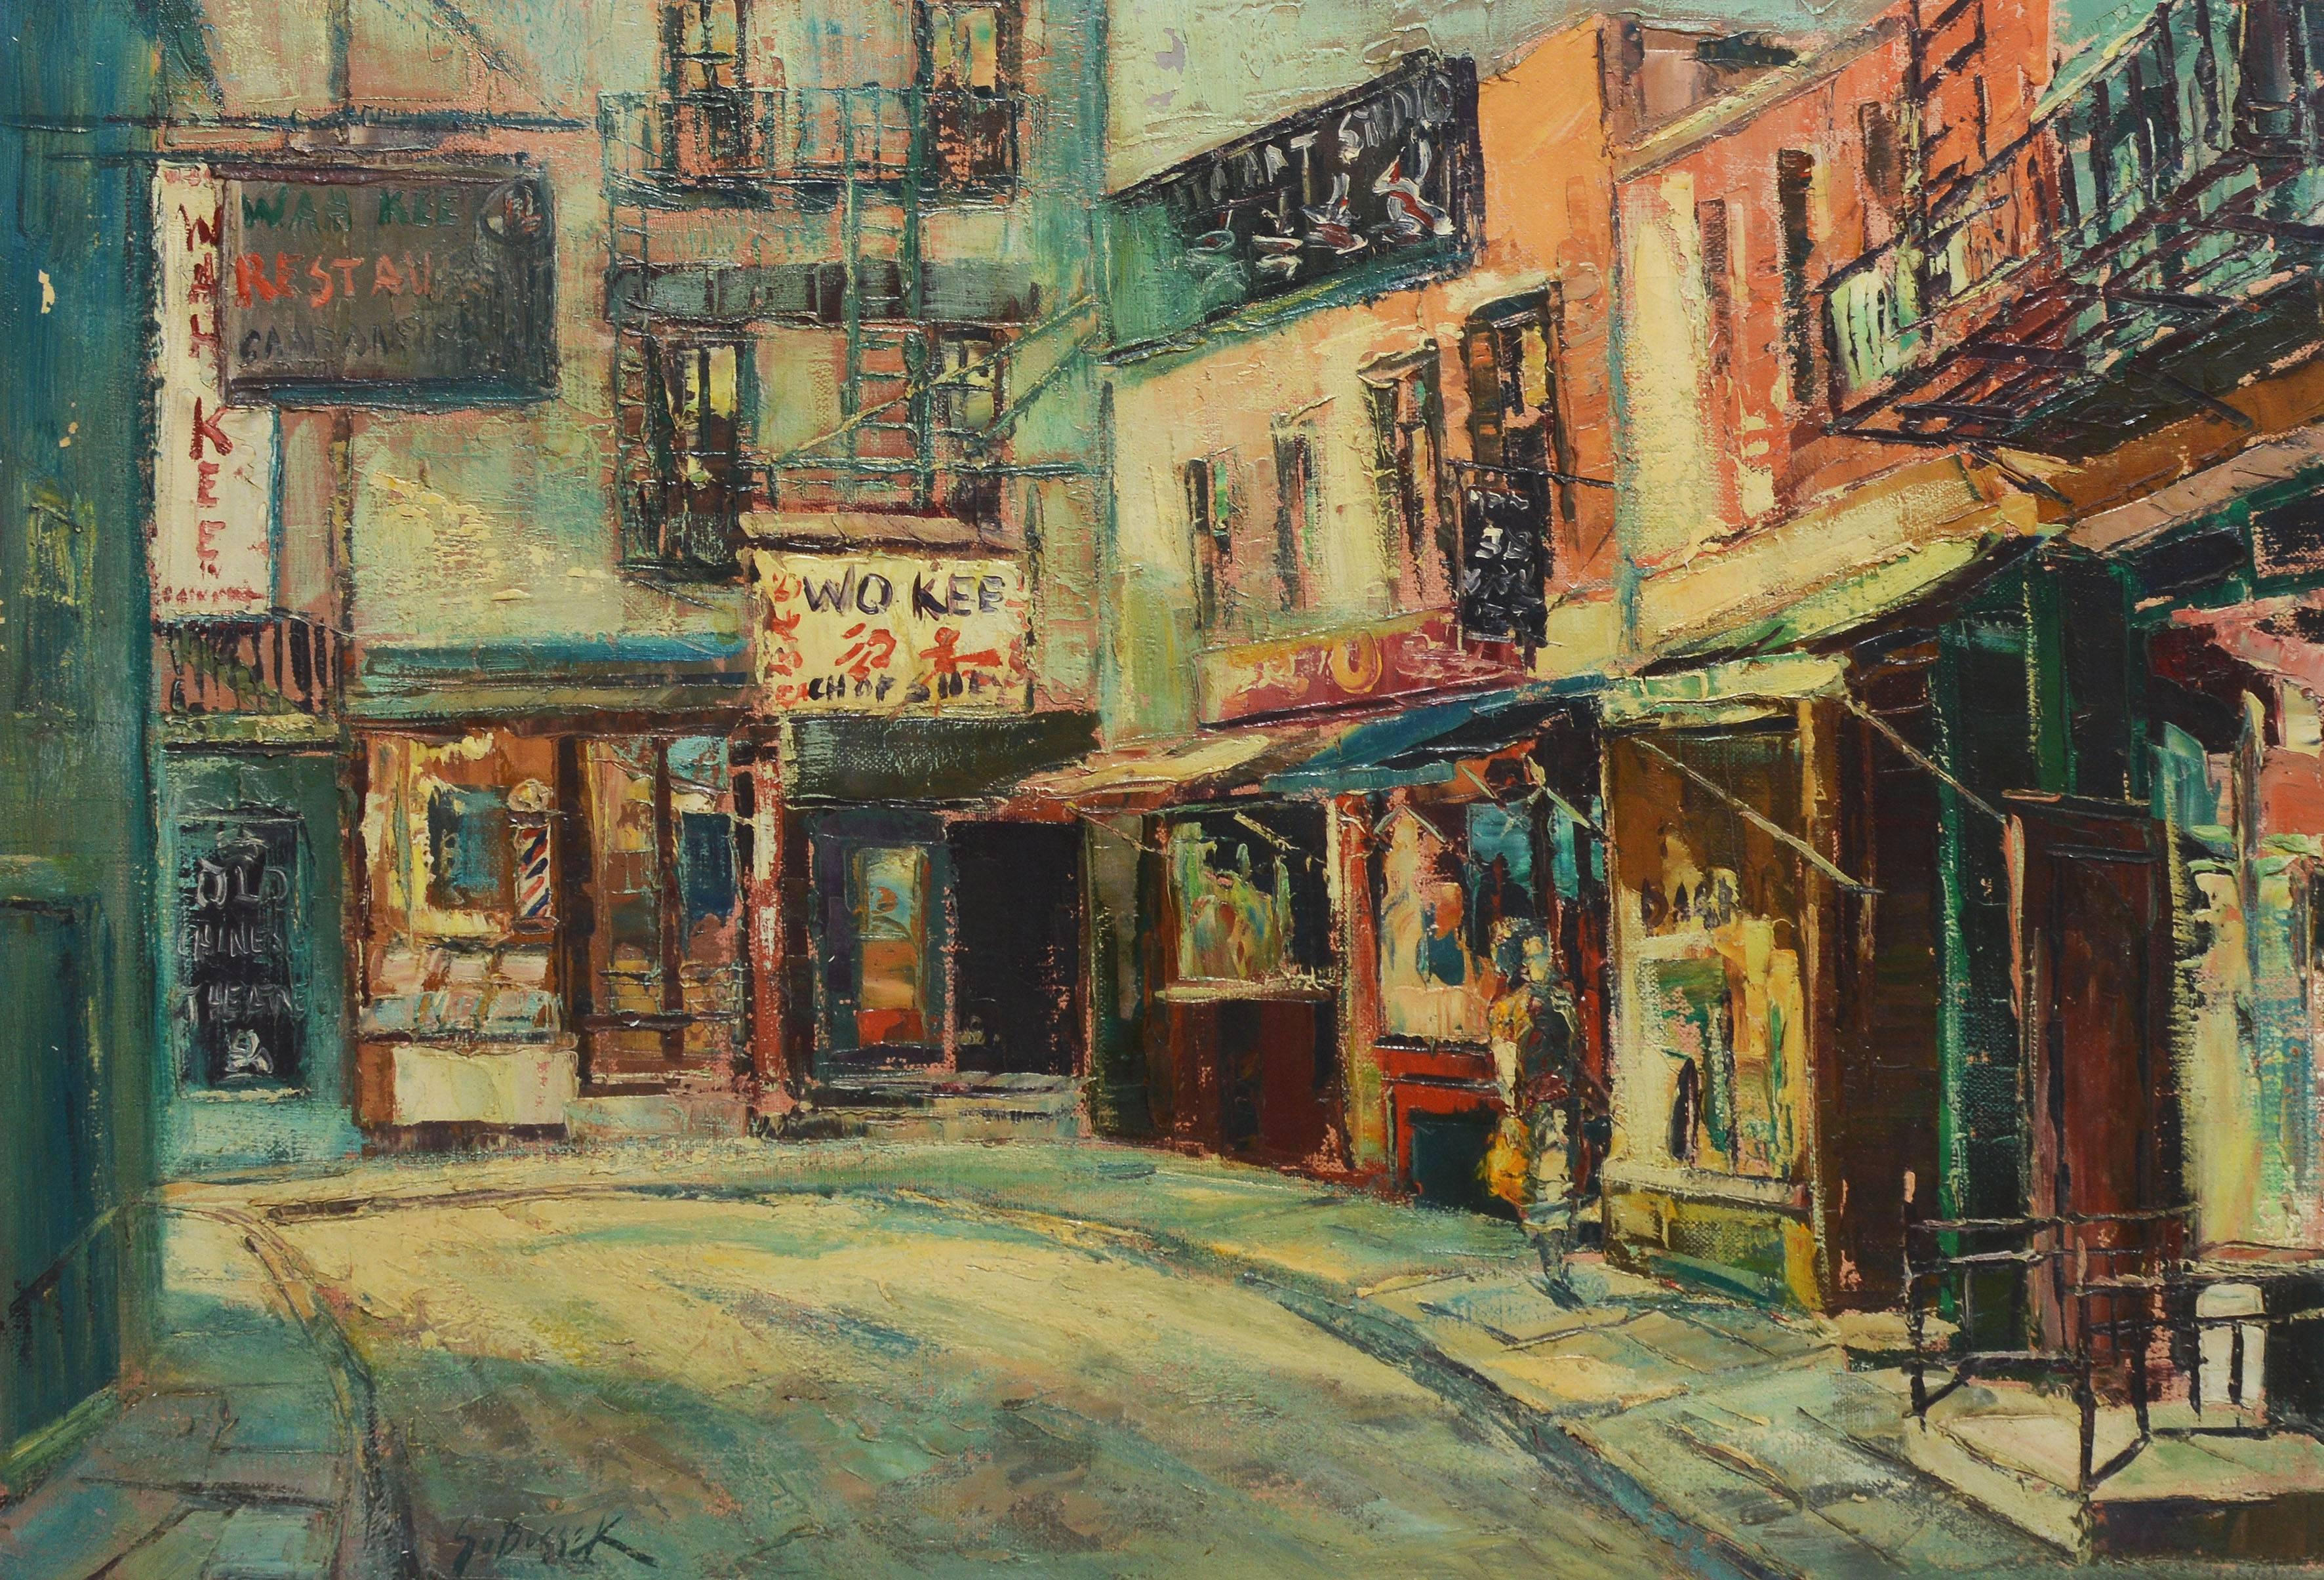 Impressionist view of Chinatown in New York City by Stanley Sobossek  (1918 - 1996).  Oil on canvas, circa 1945.  Signed.  Displayed in a period modernist frame.  Image size, 30